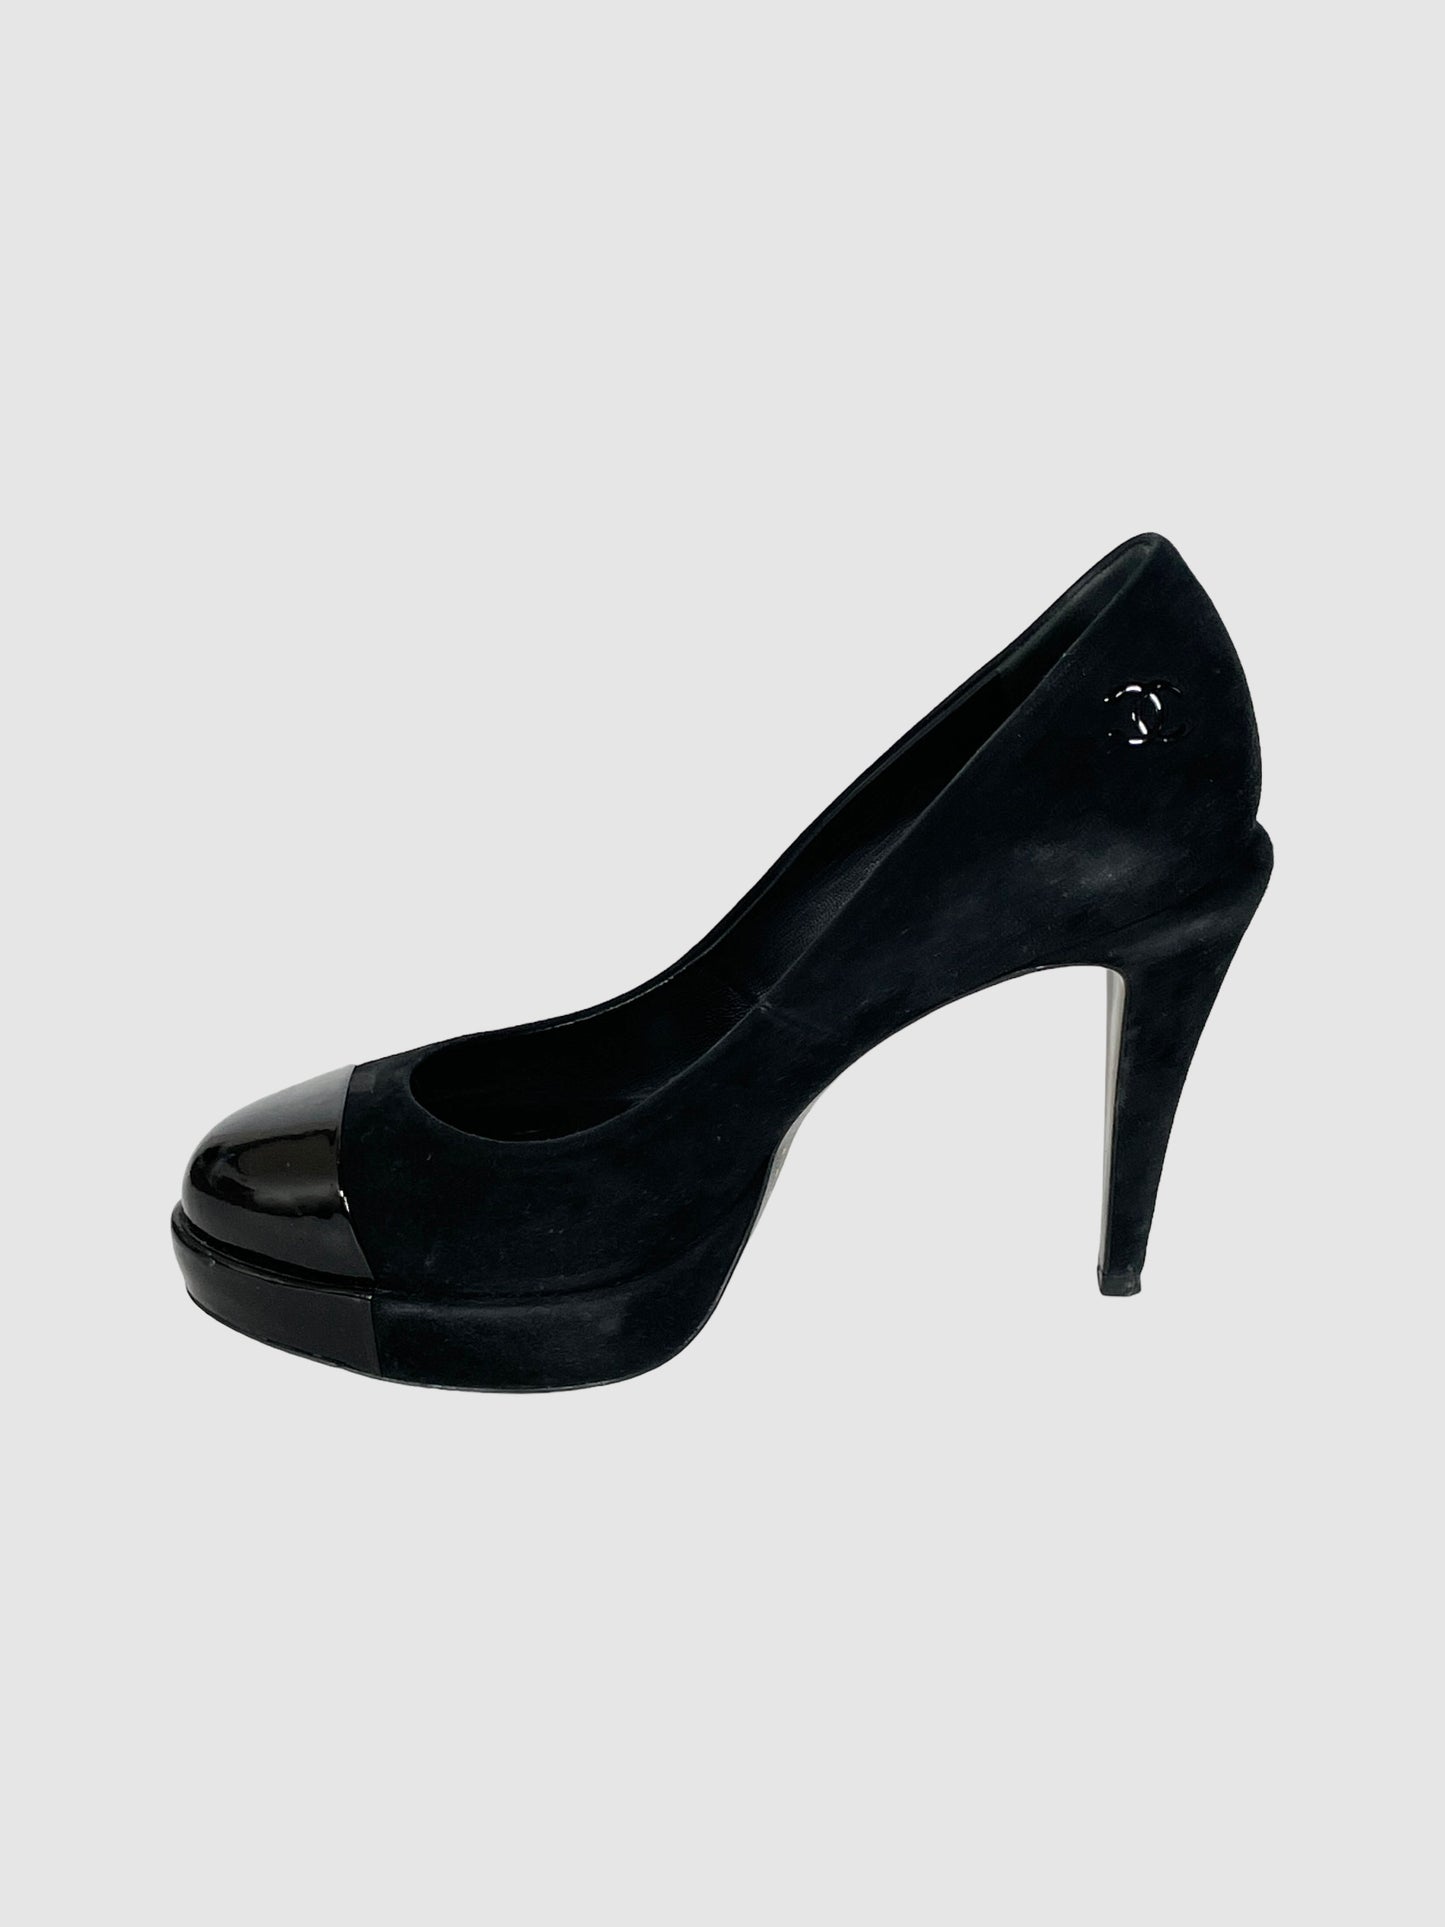 Chanel Suede with Patent Accent Pumps - Size 6.5